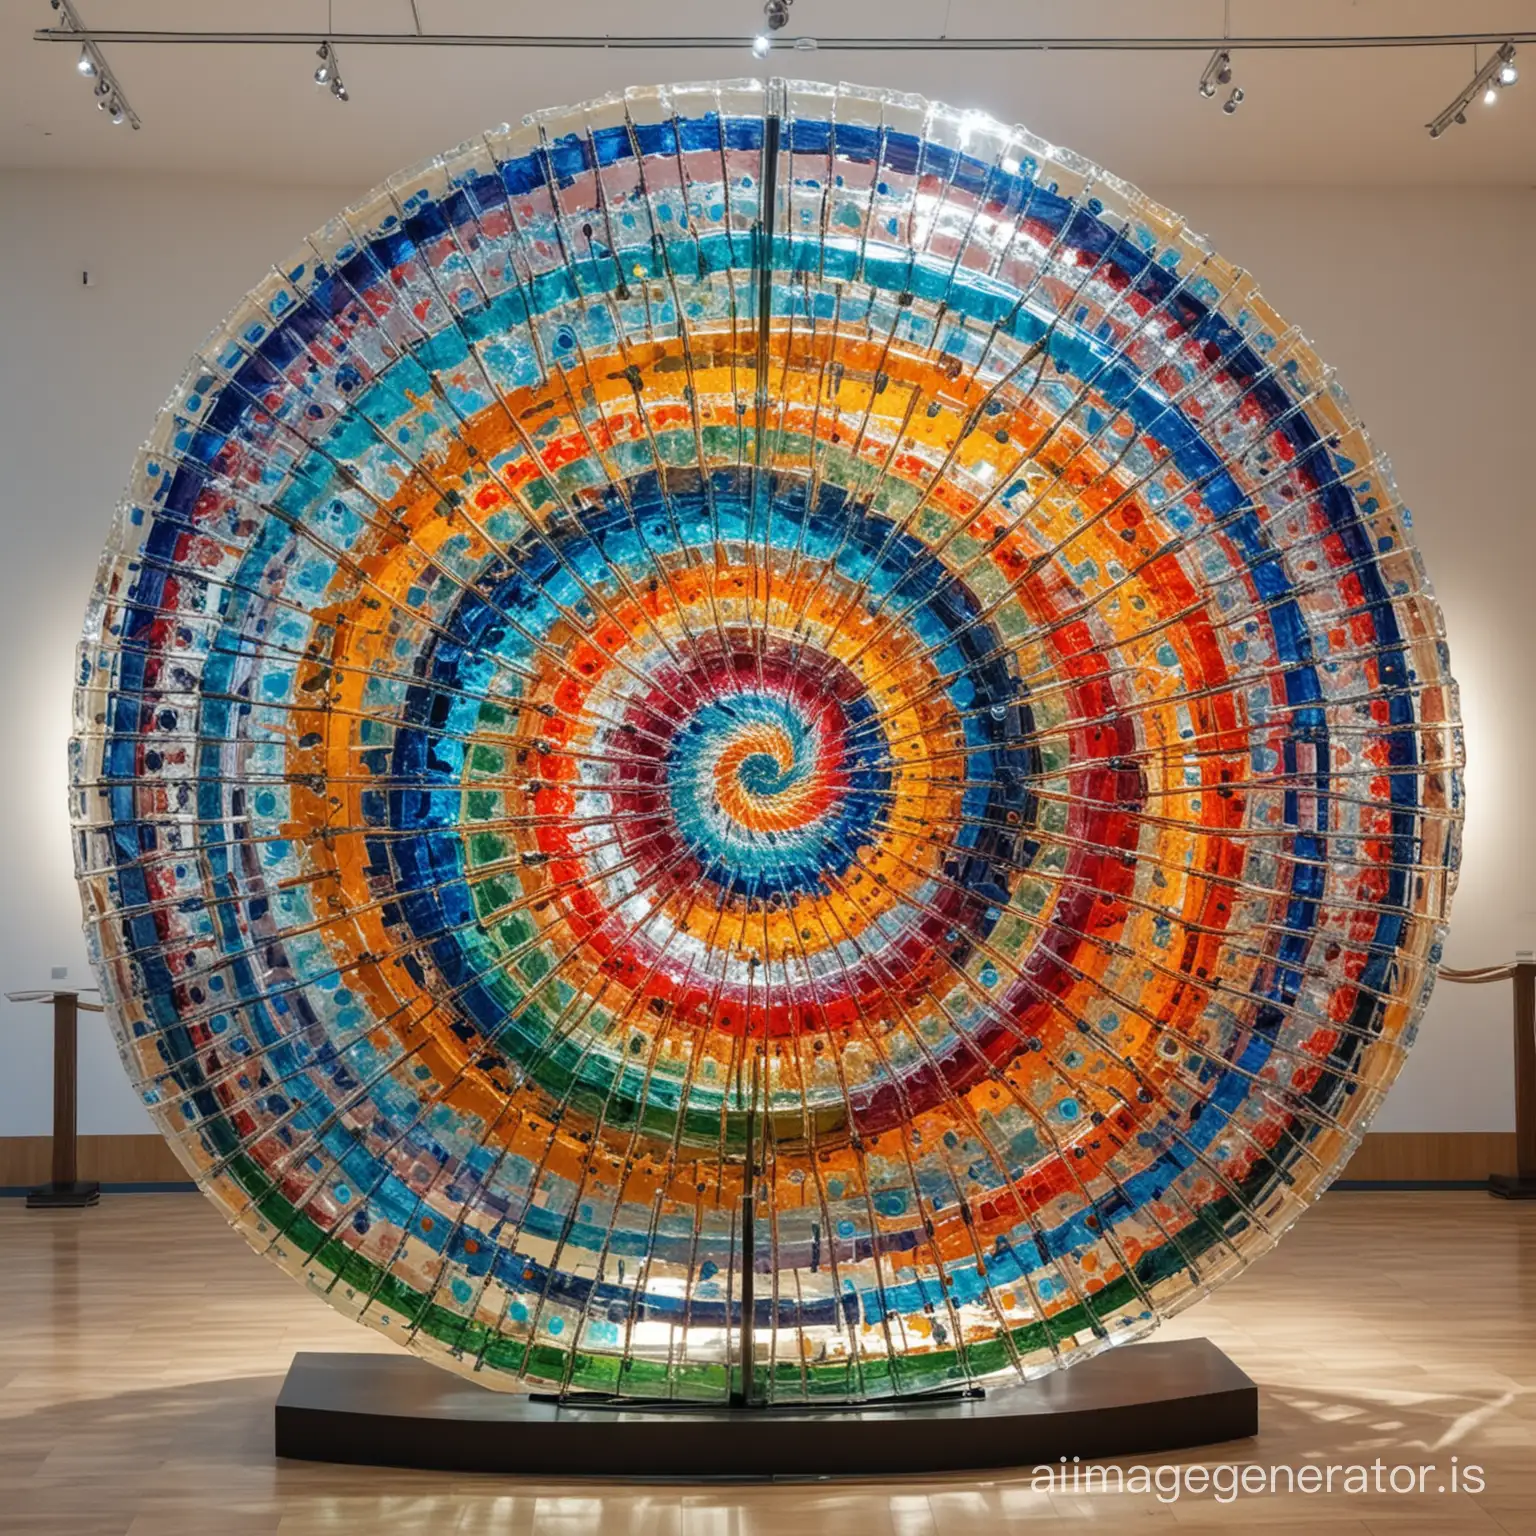 a very big spiral mandala colorful sculpture made  of shiny colored transparent glass  in the art gallery